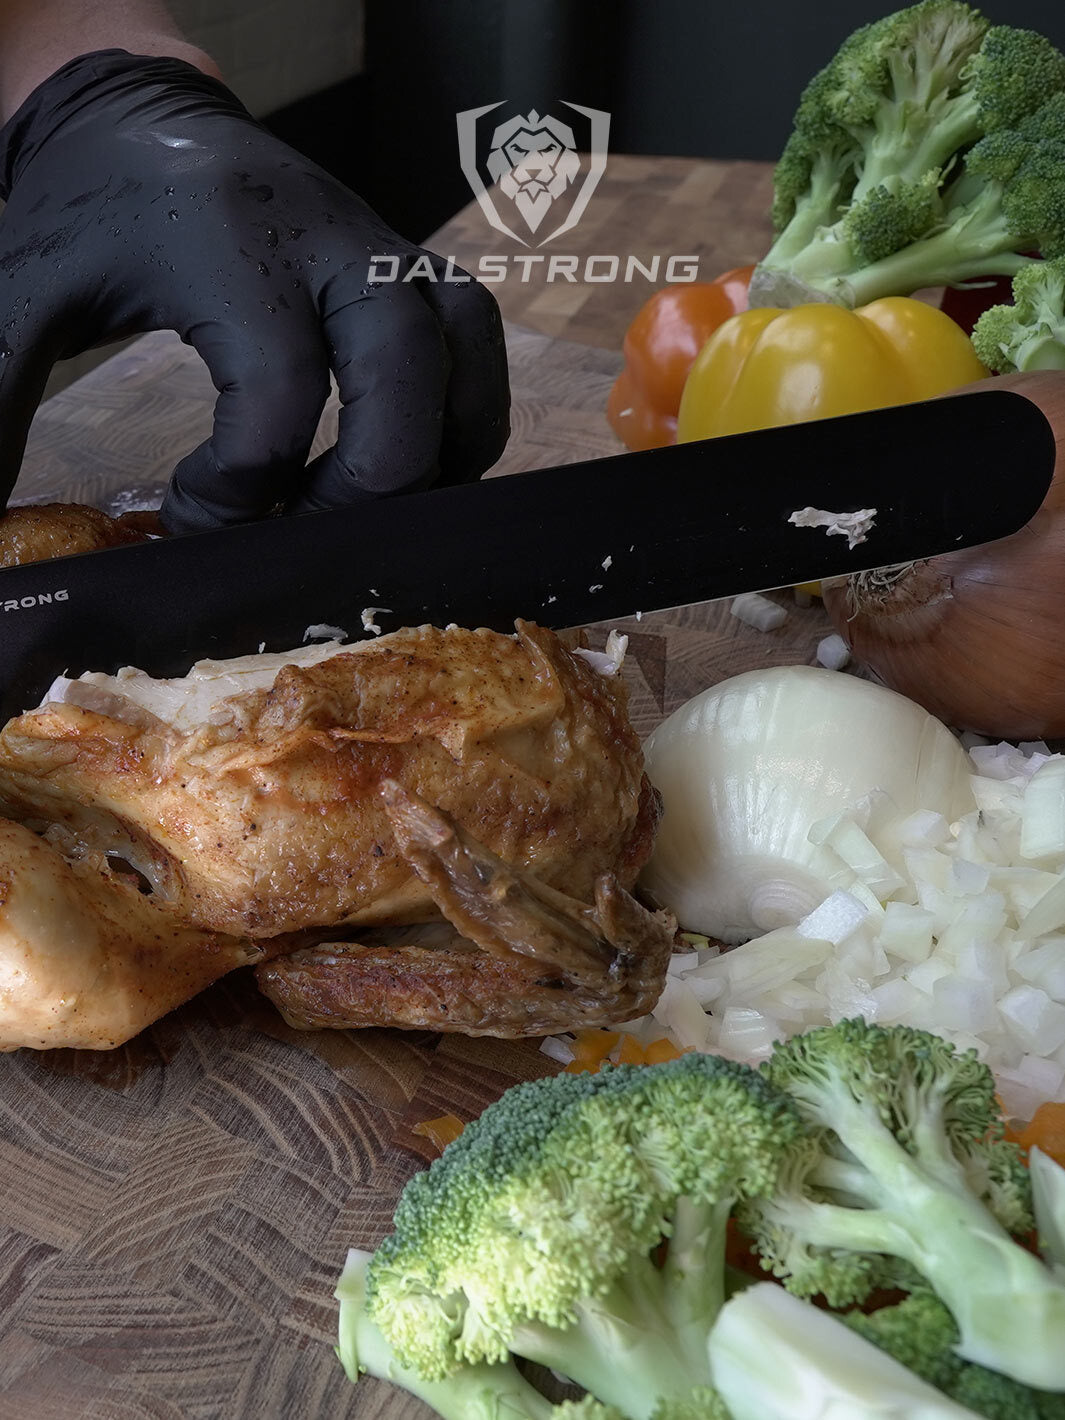 Dalstrong night shark series 12 inch slicing and carving knife with water proof handle slicing a roasted chicken.